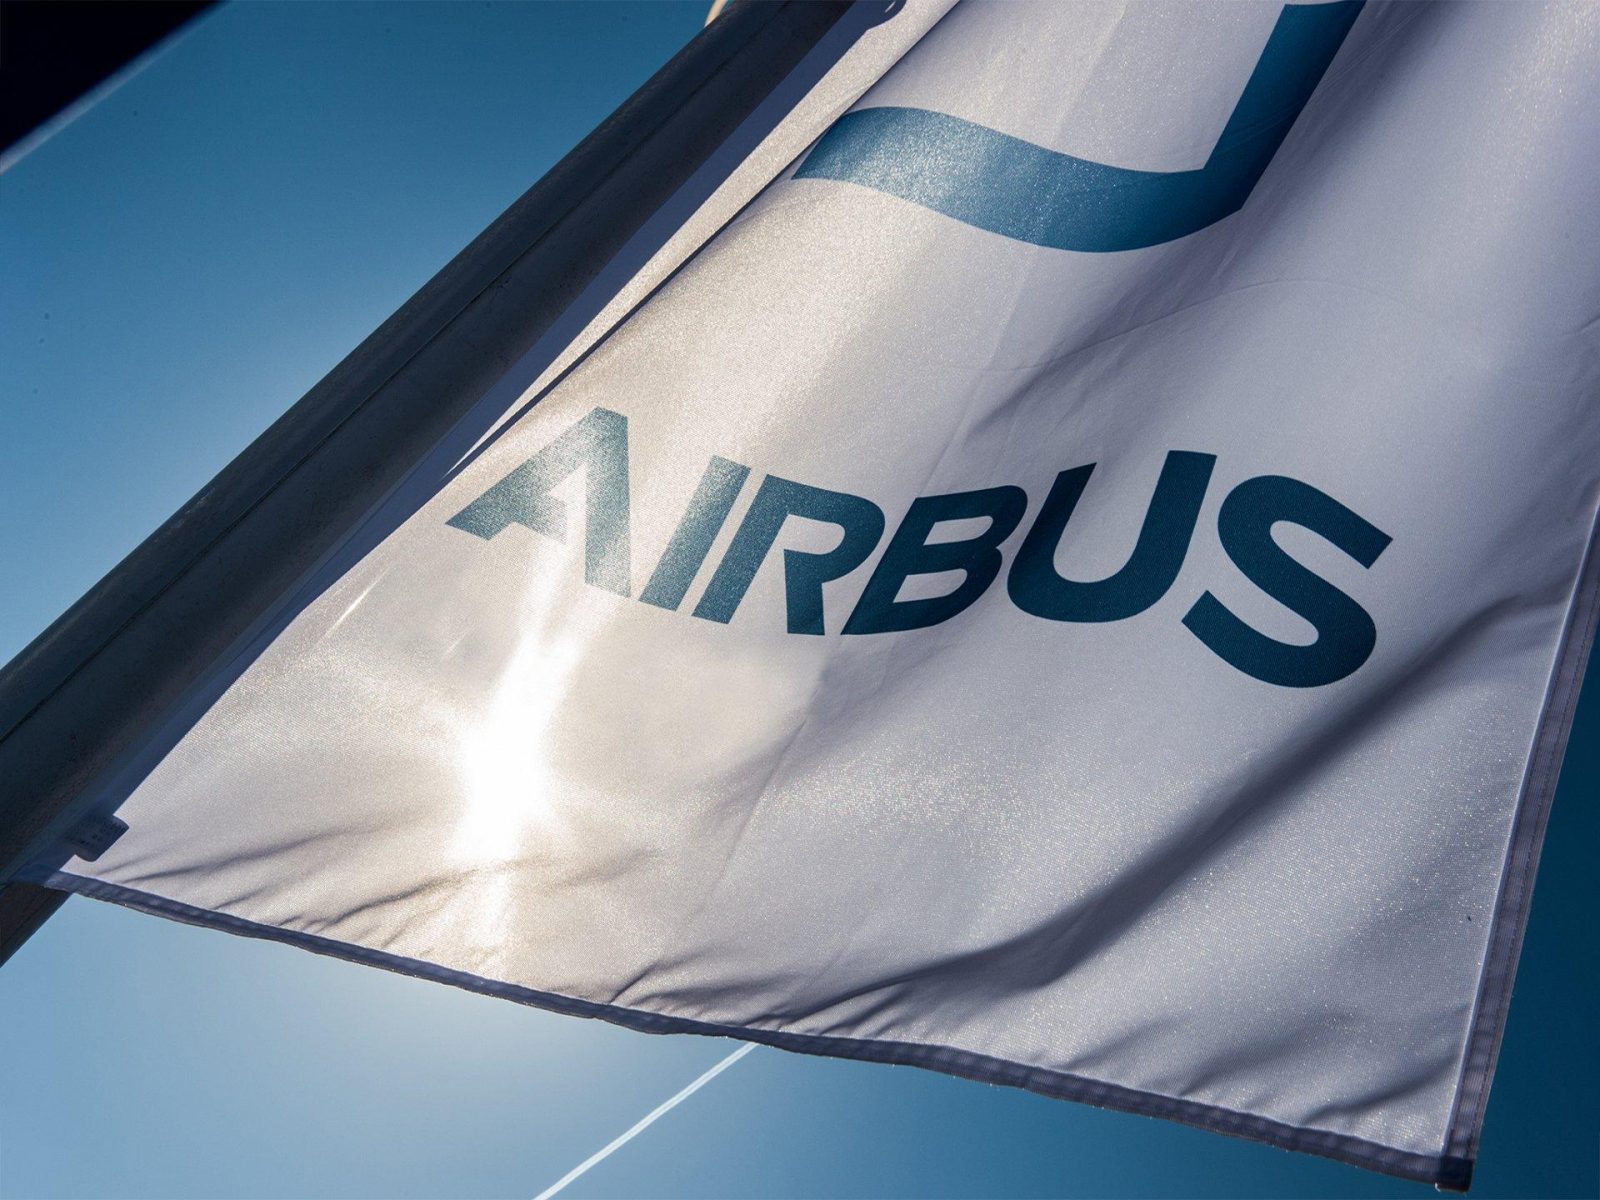 Orders: Airbus Maintains Lead Over Boeing in July